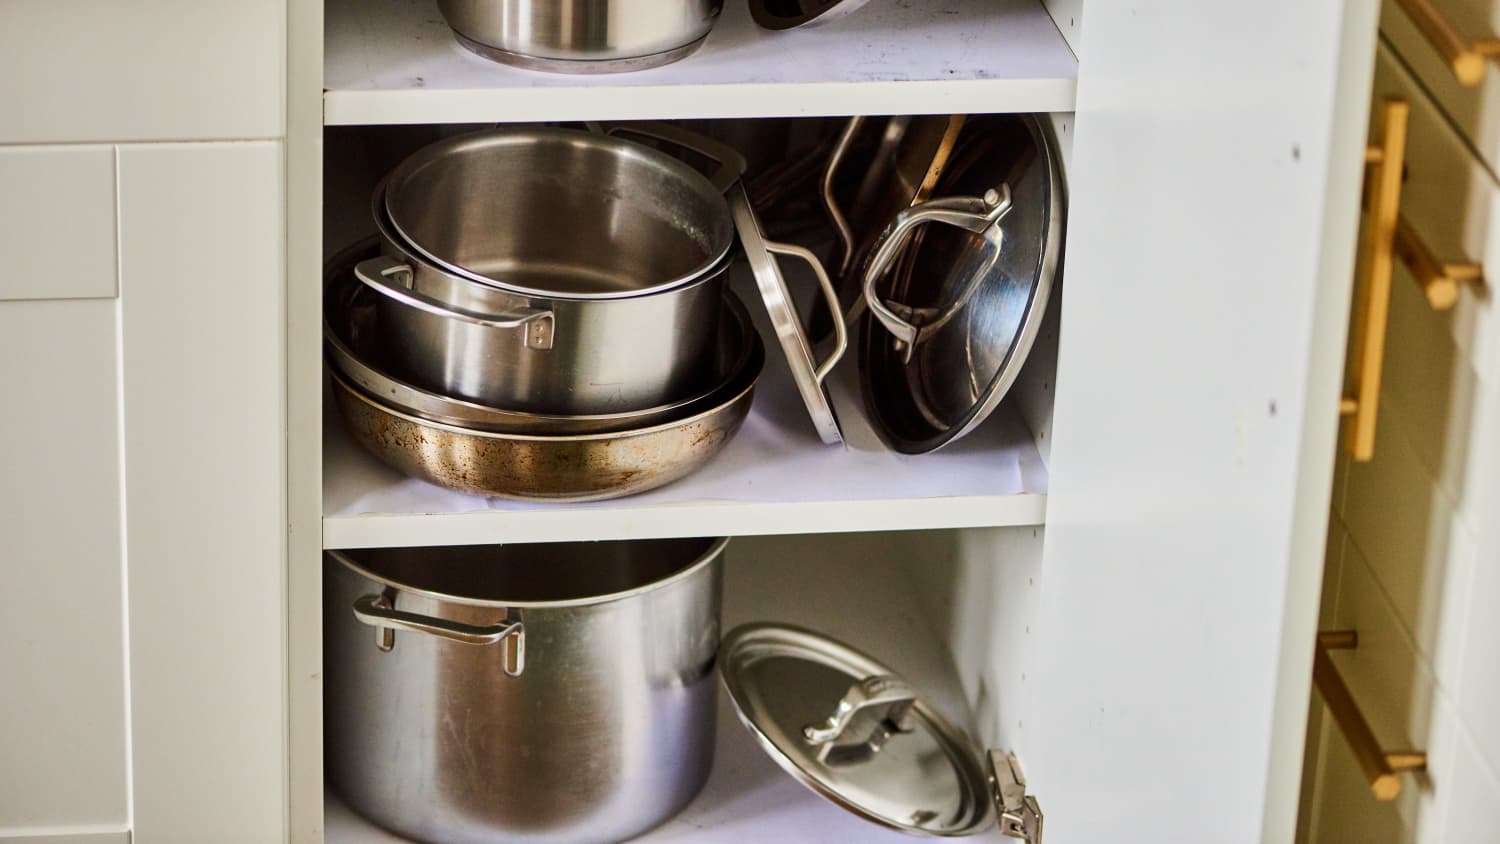 https://cdn.apartmenttherapy.info/image/upload/f_jpg,q_auto:eco,c_fill,g_auto,w_1500,ar_16:9/k%2FPhoto%2FLifestyle%2F2019-08-storing-lids-pots-pans%2F6-Amazon-Find-Can-Make-Storing-the-Lids-to-Your-Pots-and-Pans-a-Million-Times-Easier_073